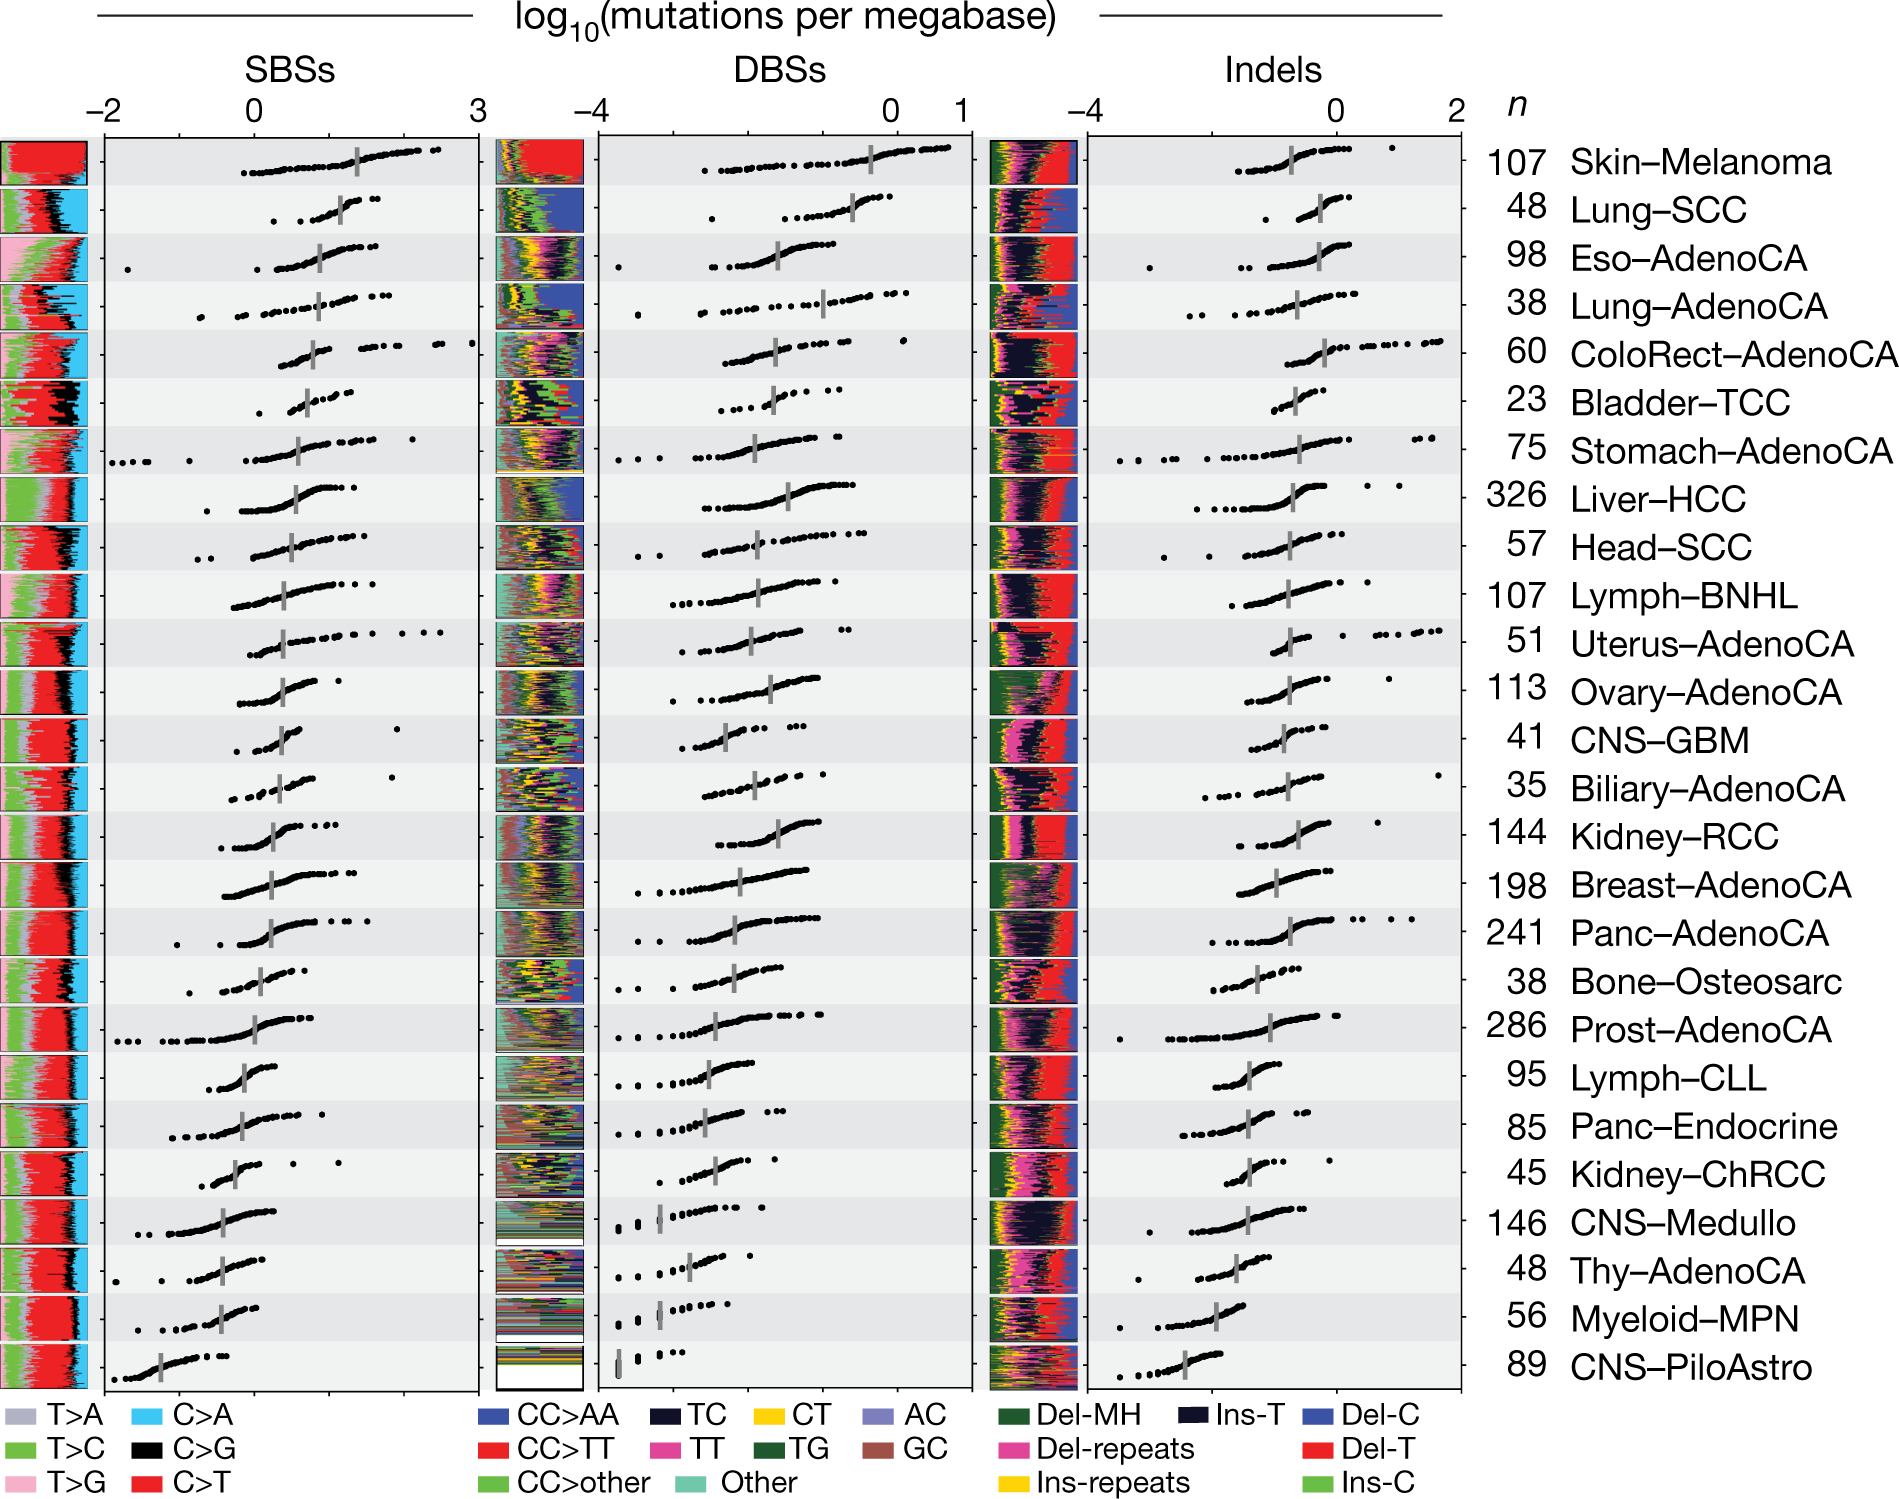 The repertoire of mutational signatures in human cancer